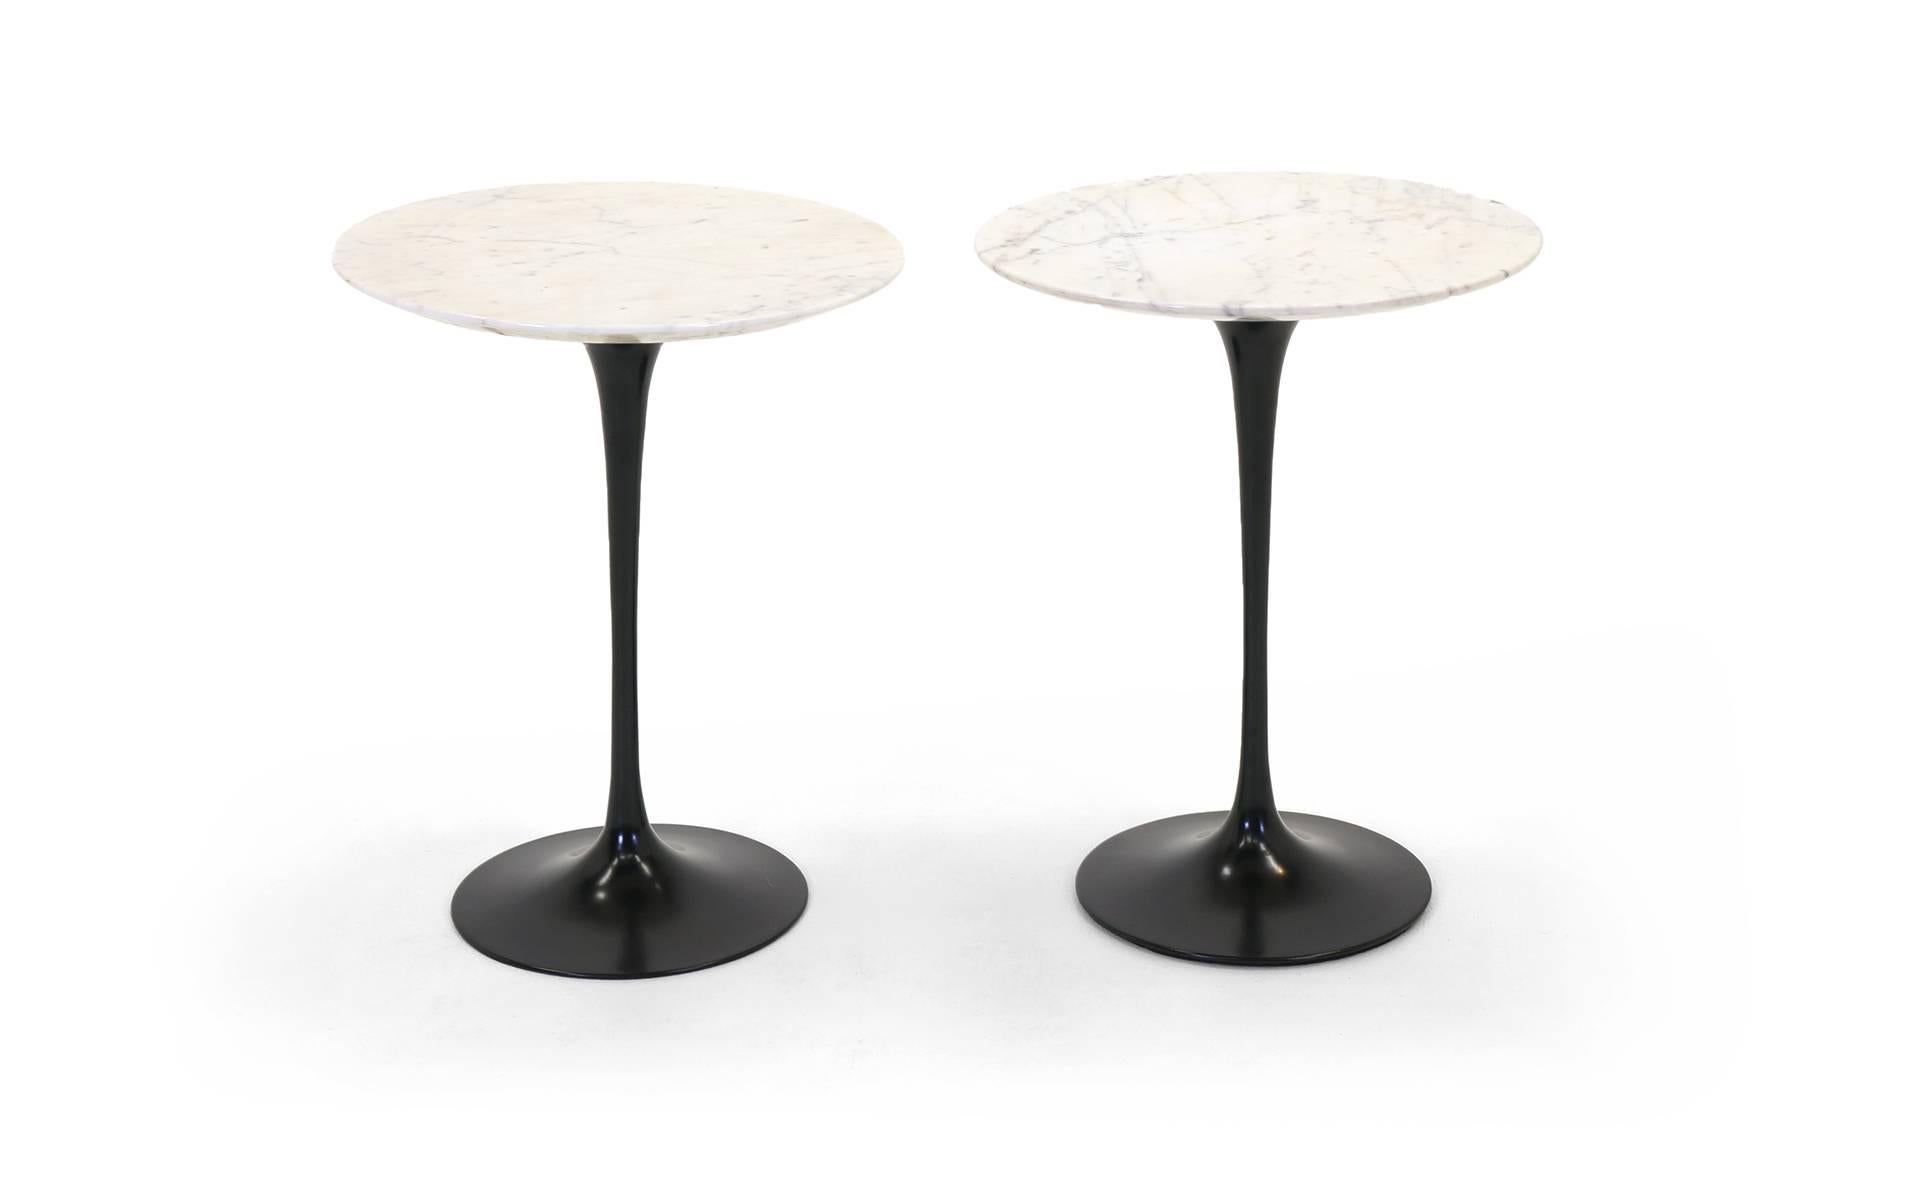 Pair of Eero Saarinen for Knoll side tables. Black lacquered bases with white marble tops. Excellent condition.